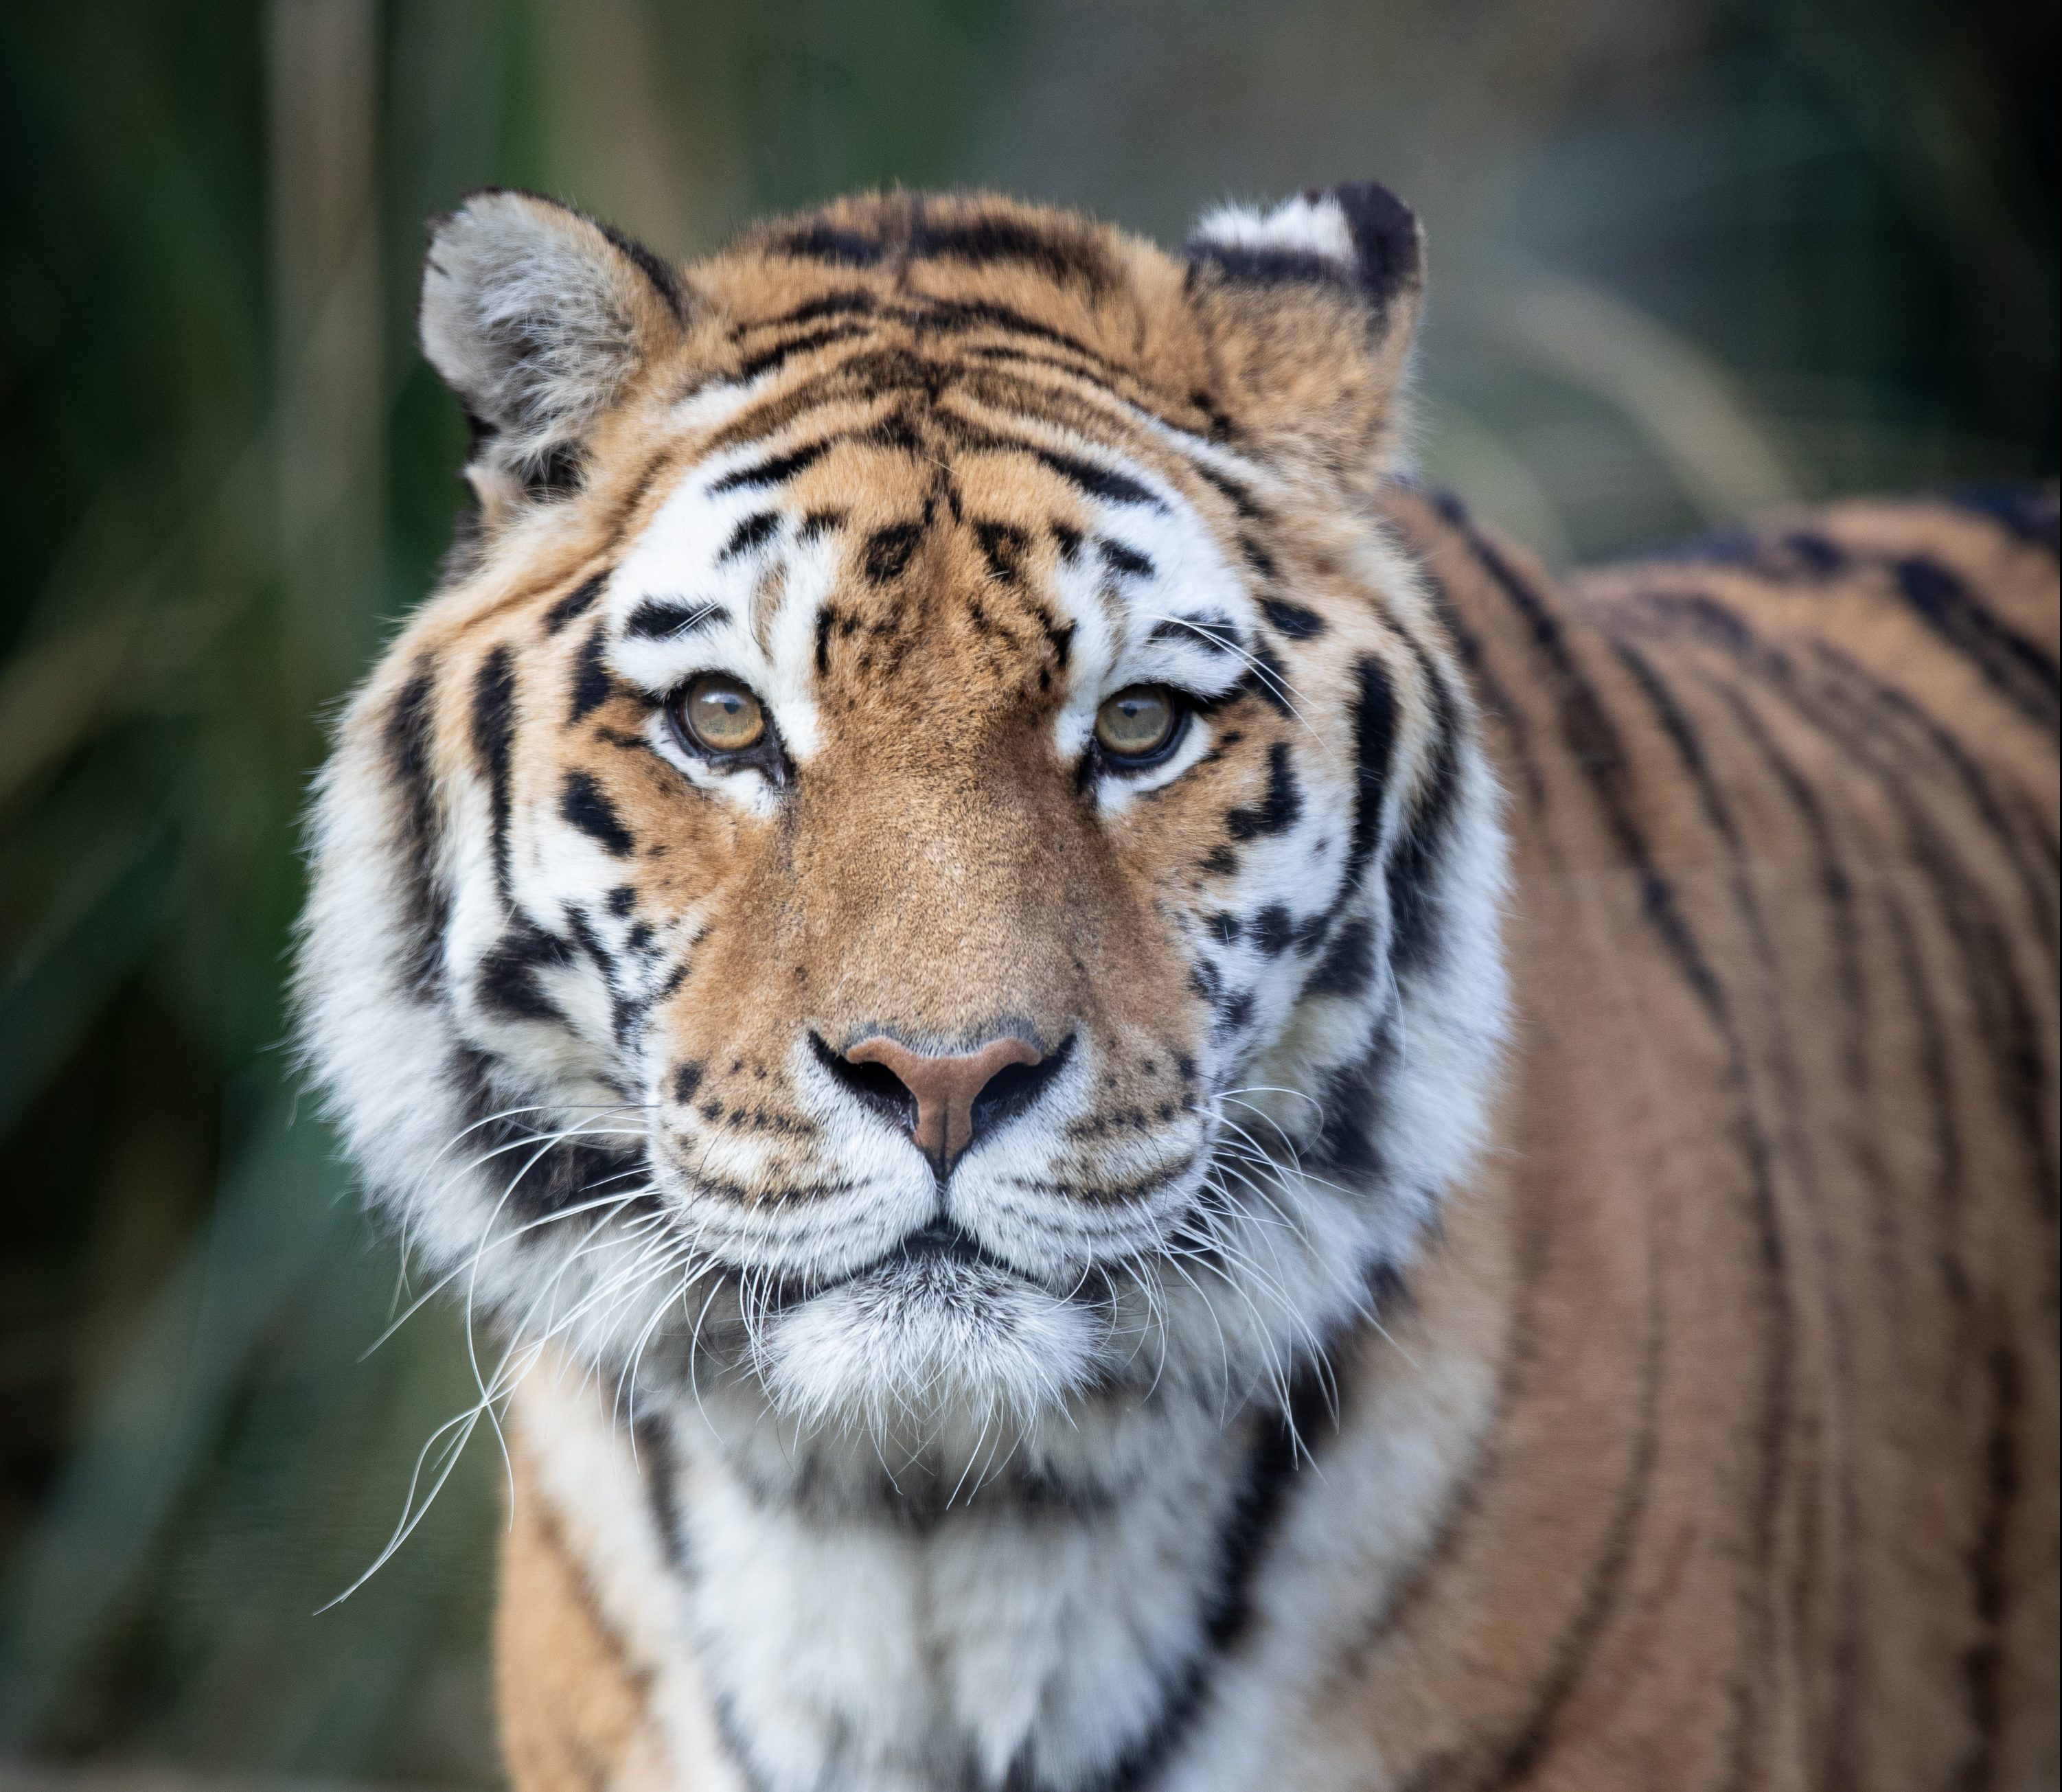 a female Amur tiger looking directly at the camera